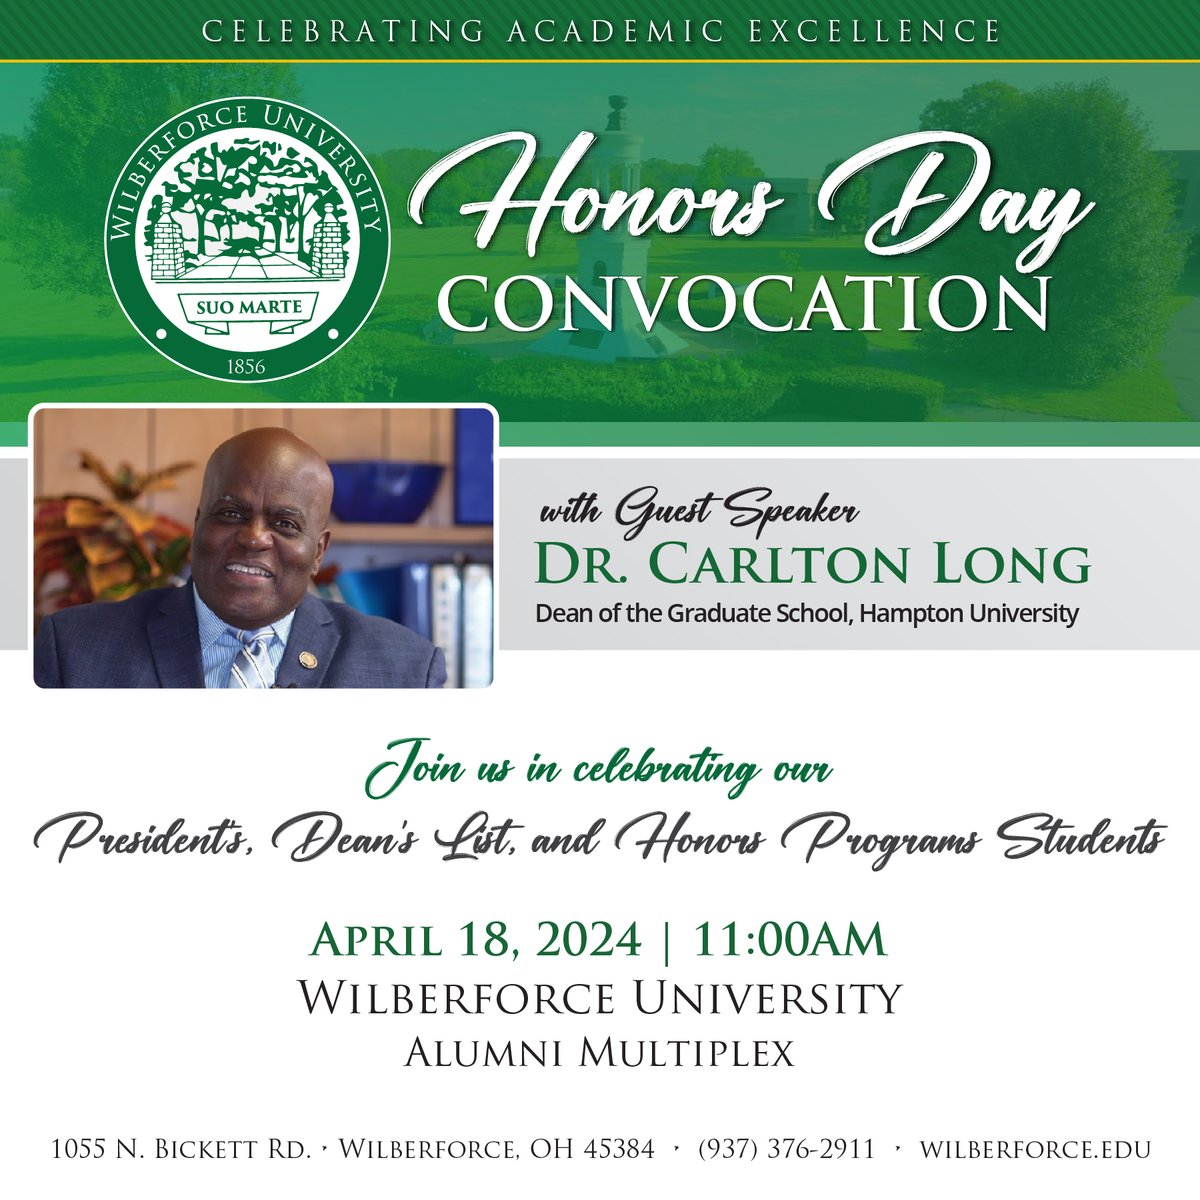 Join us for a momentous celebration, the 2024 Honors Day Convocation at Wilberforce University! 🌟 Let's applaud the remarkable achievements of our students on the President's, Dean's List, and Honors Program students. Happening April 18, 2024 at 11:00AM in the Alumni Multiplex!